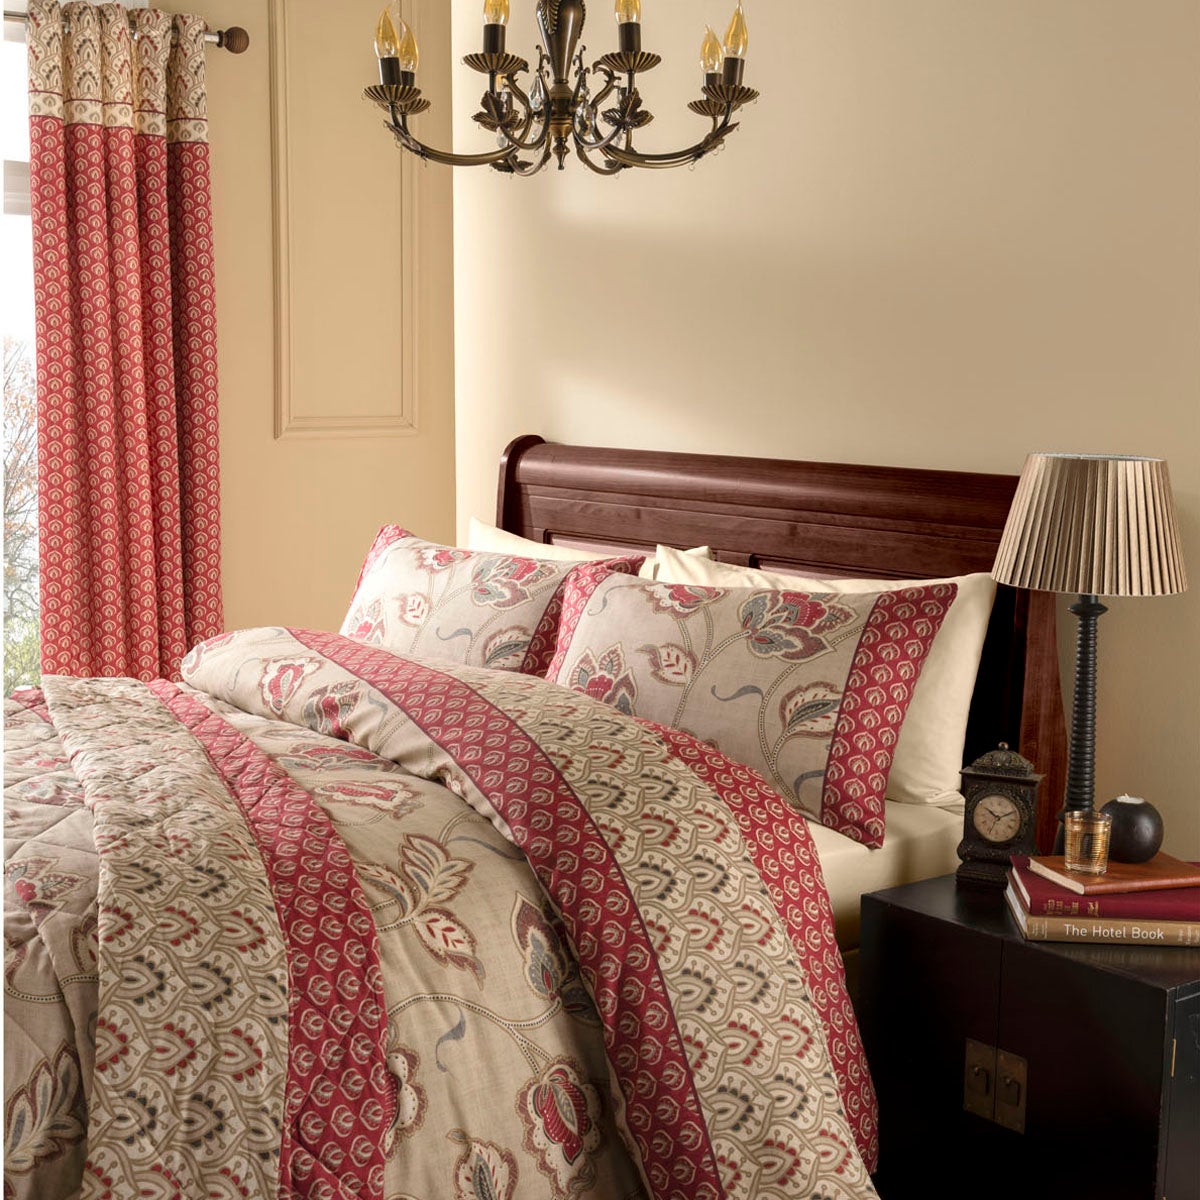 Image of Catherine Lansfield Kashmir Red Duvet Cover and Pillowcase Set Beige/White/Black